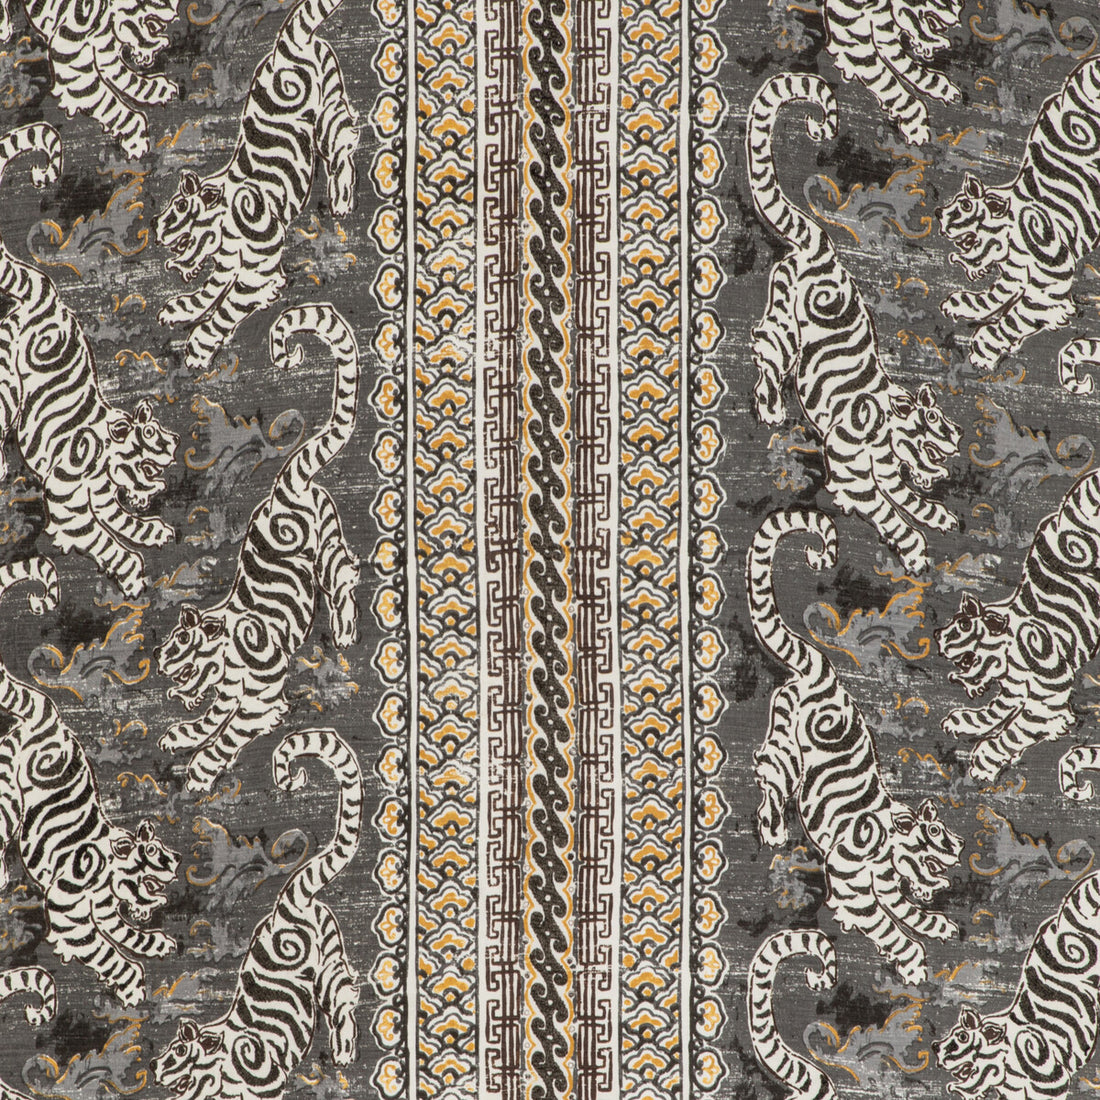 Bongol Print fabric in charcoal color - pattern 2020197.2146.0 - by Lee Jofa in the Mindoro collection